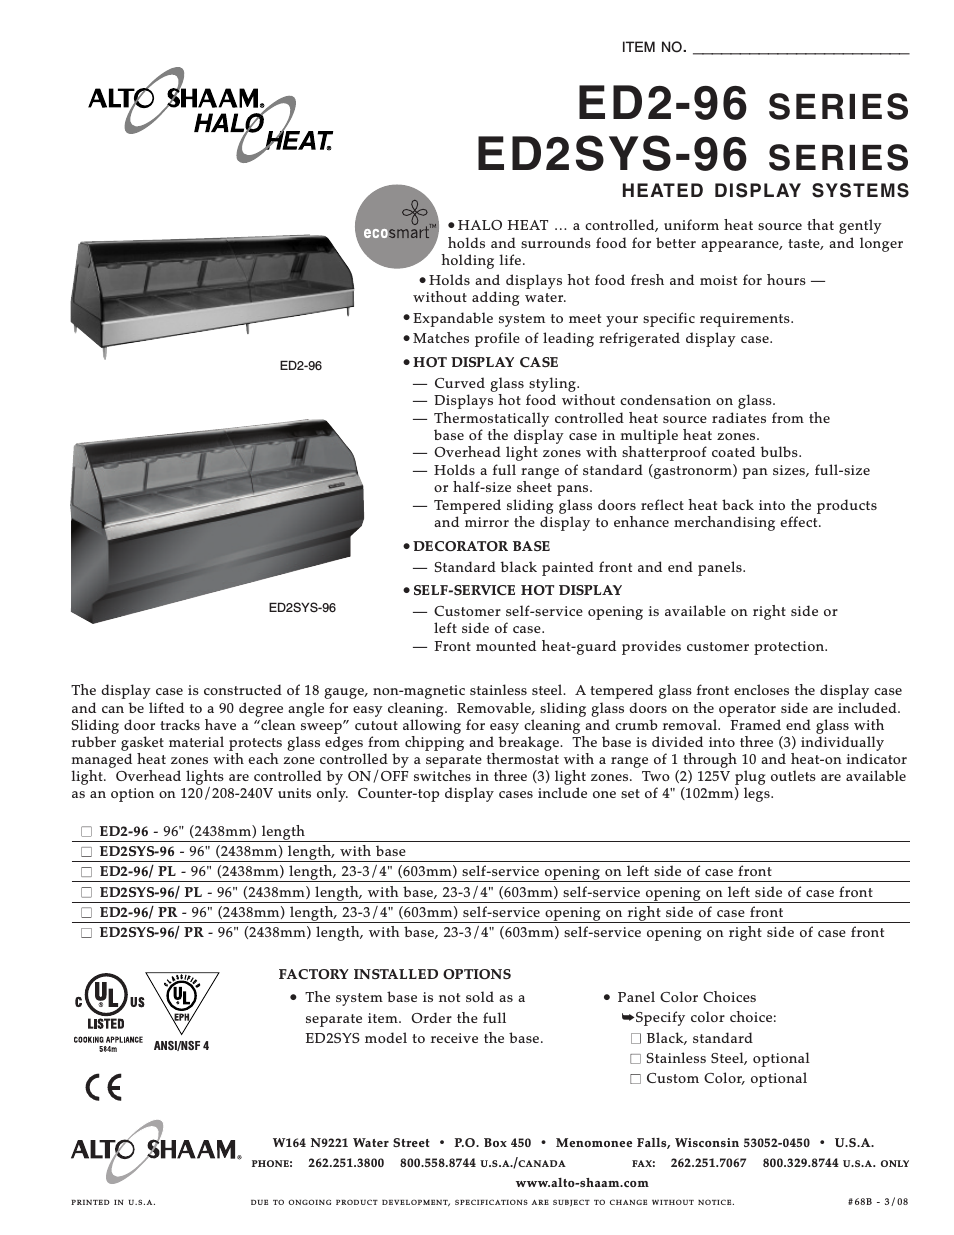 ED2SYS-96